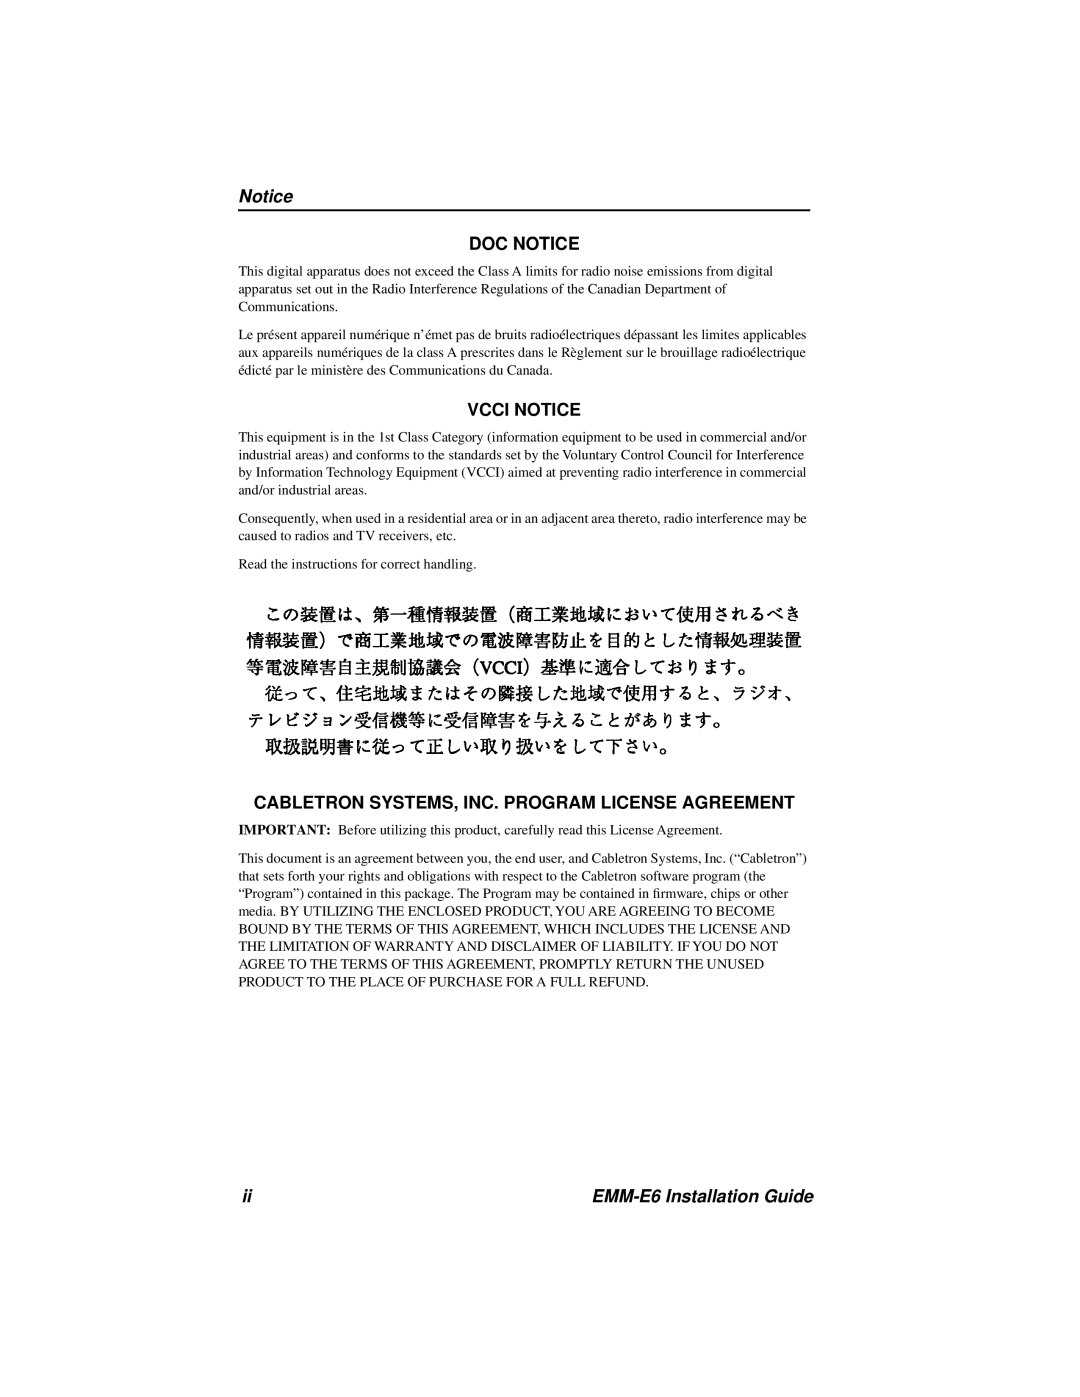 Cabletron Systems EMM-E6 manual Doc Notice, Vcci Notice, Cabletron Systems, Inc. Program License Agreement 